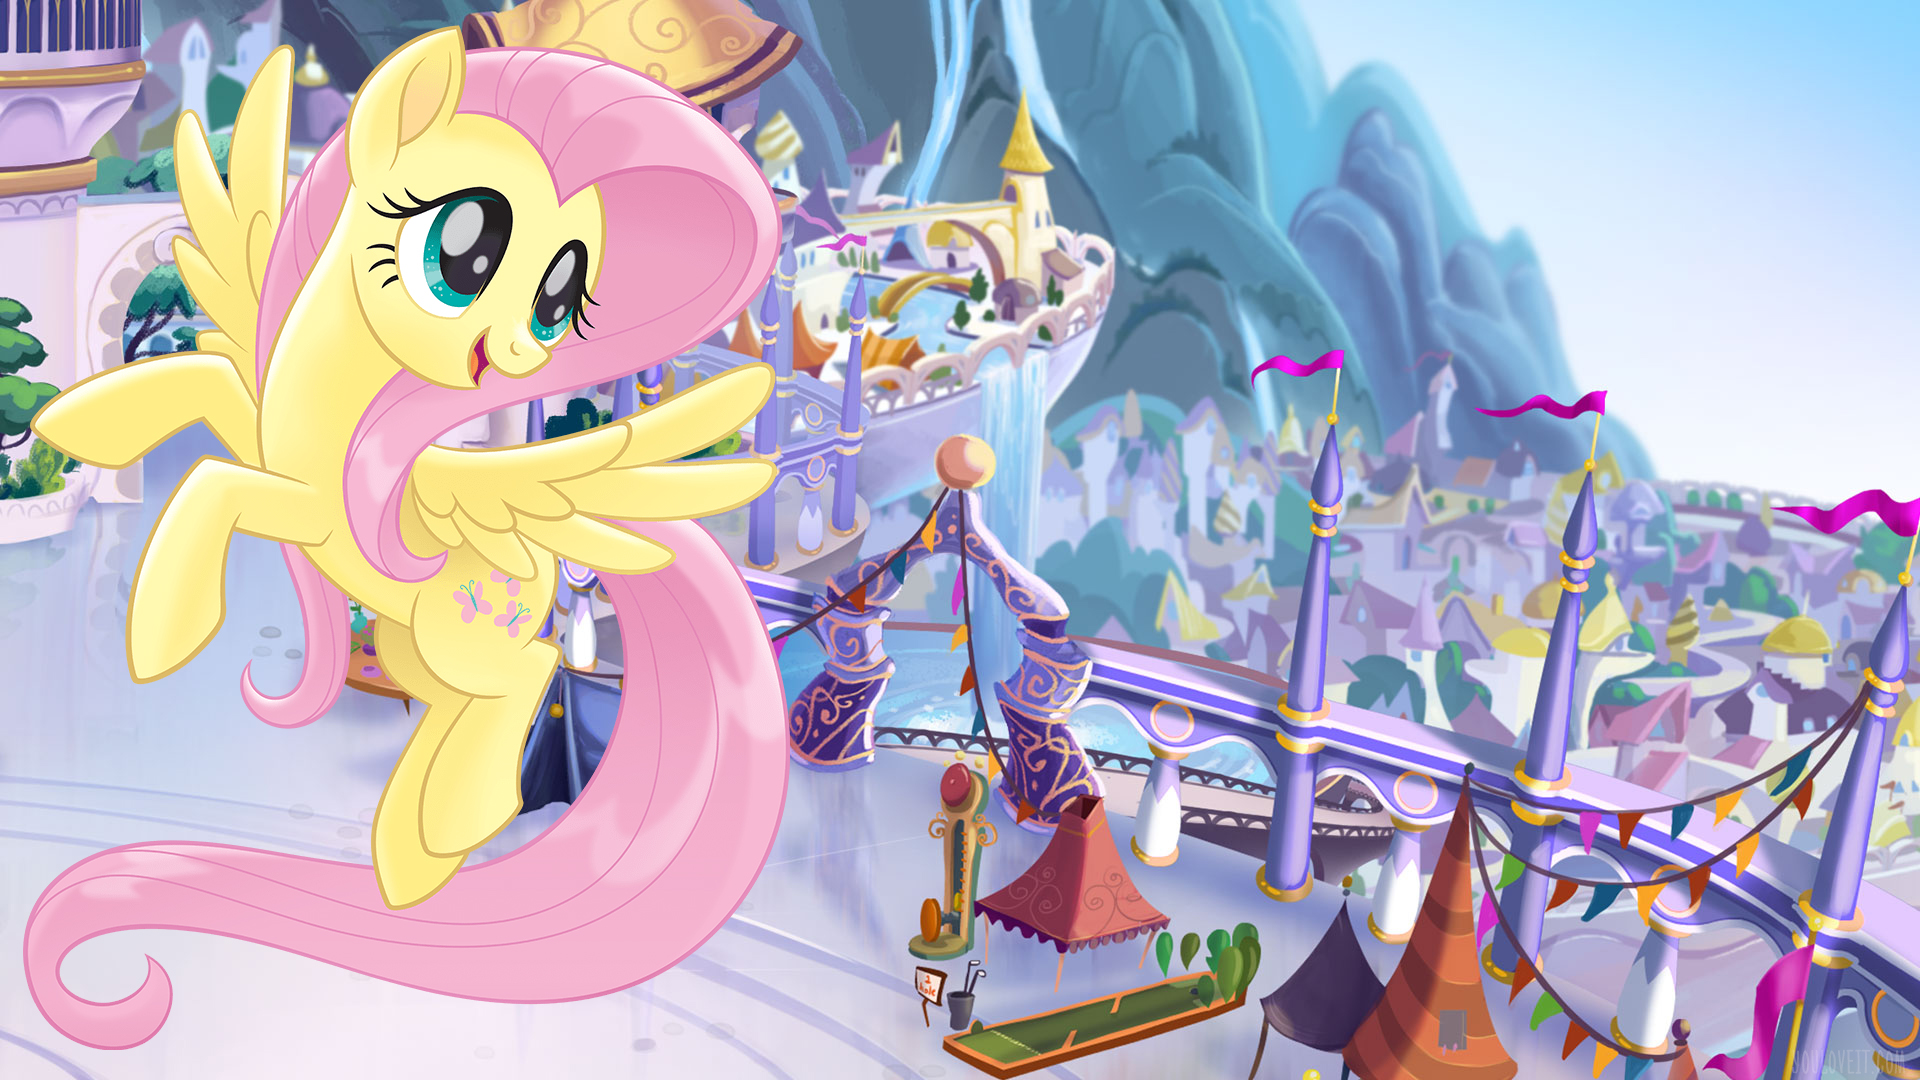 http://www.youloveit.com/uploads/posts/2017-08/1501837520_youloveit_com_my_little_pony_the_movie_wallpapers20.jpg